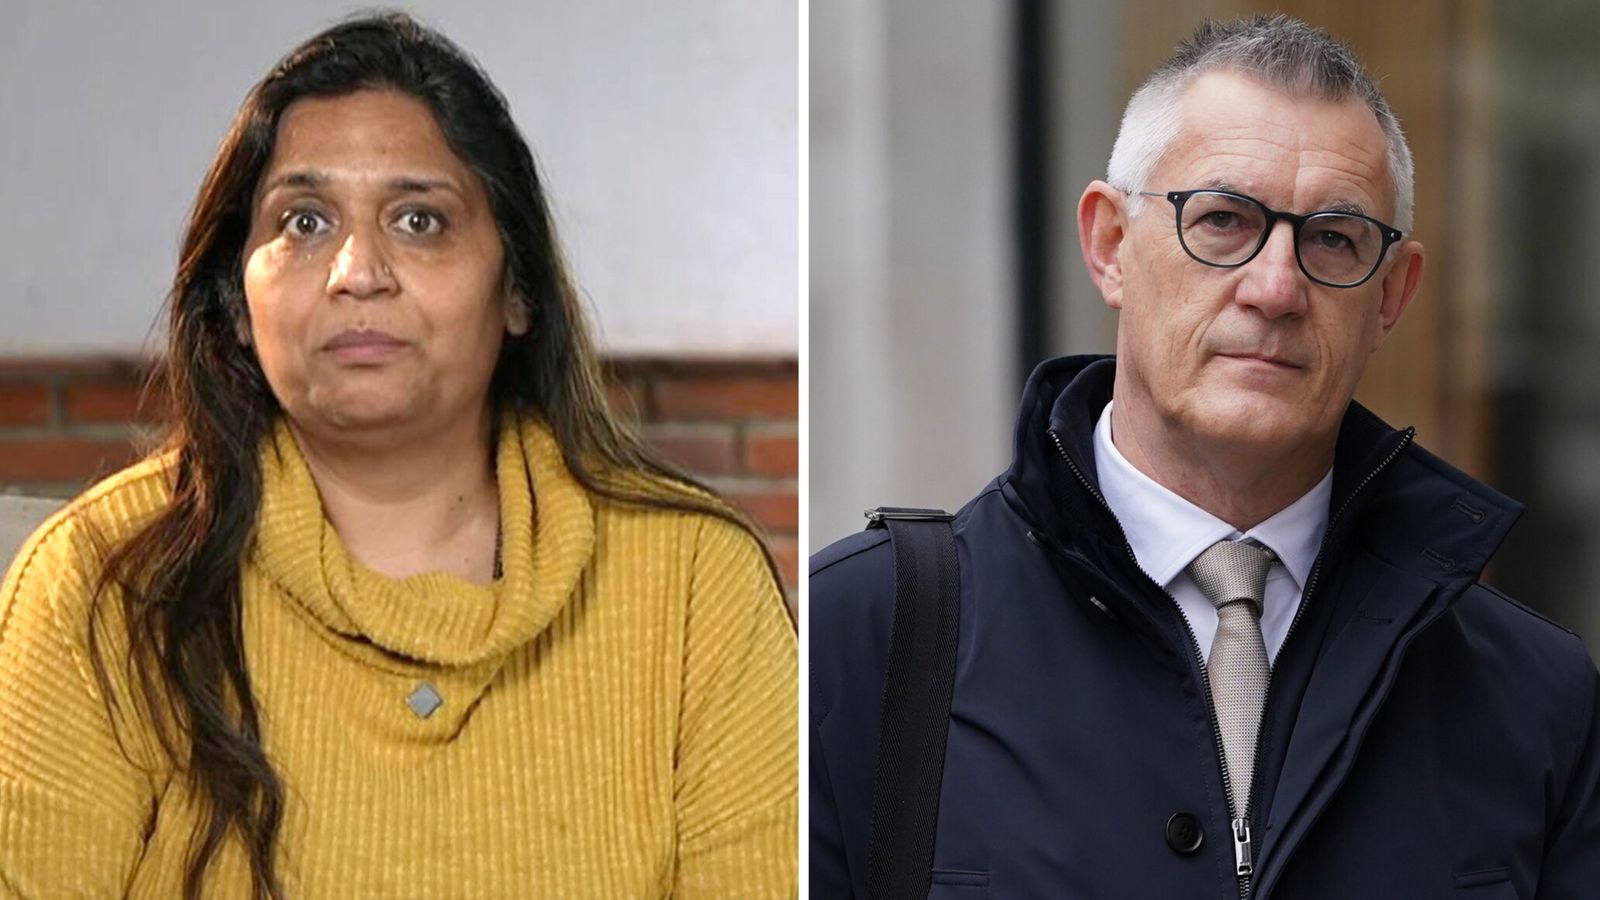 Sub-postmaster wrongly sent to prison while pregnant rejects apology from ex-Post Office boss David Smith